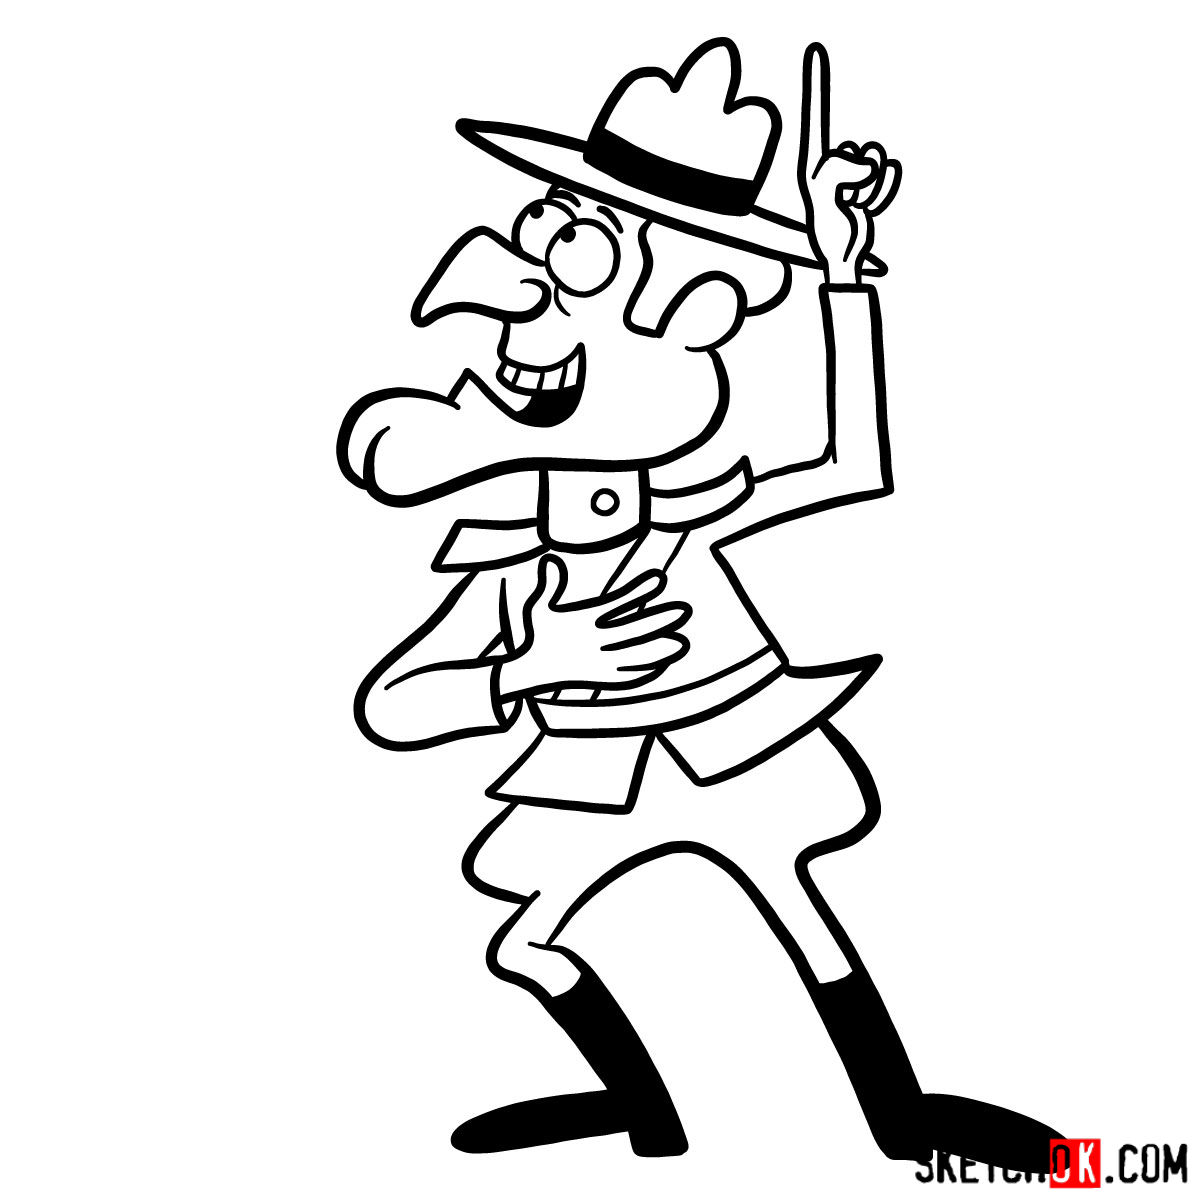 How to draw Dudley Do-Right - step 11